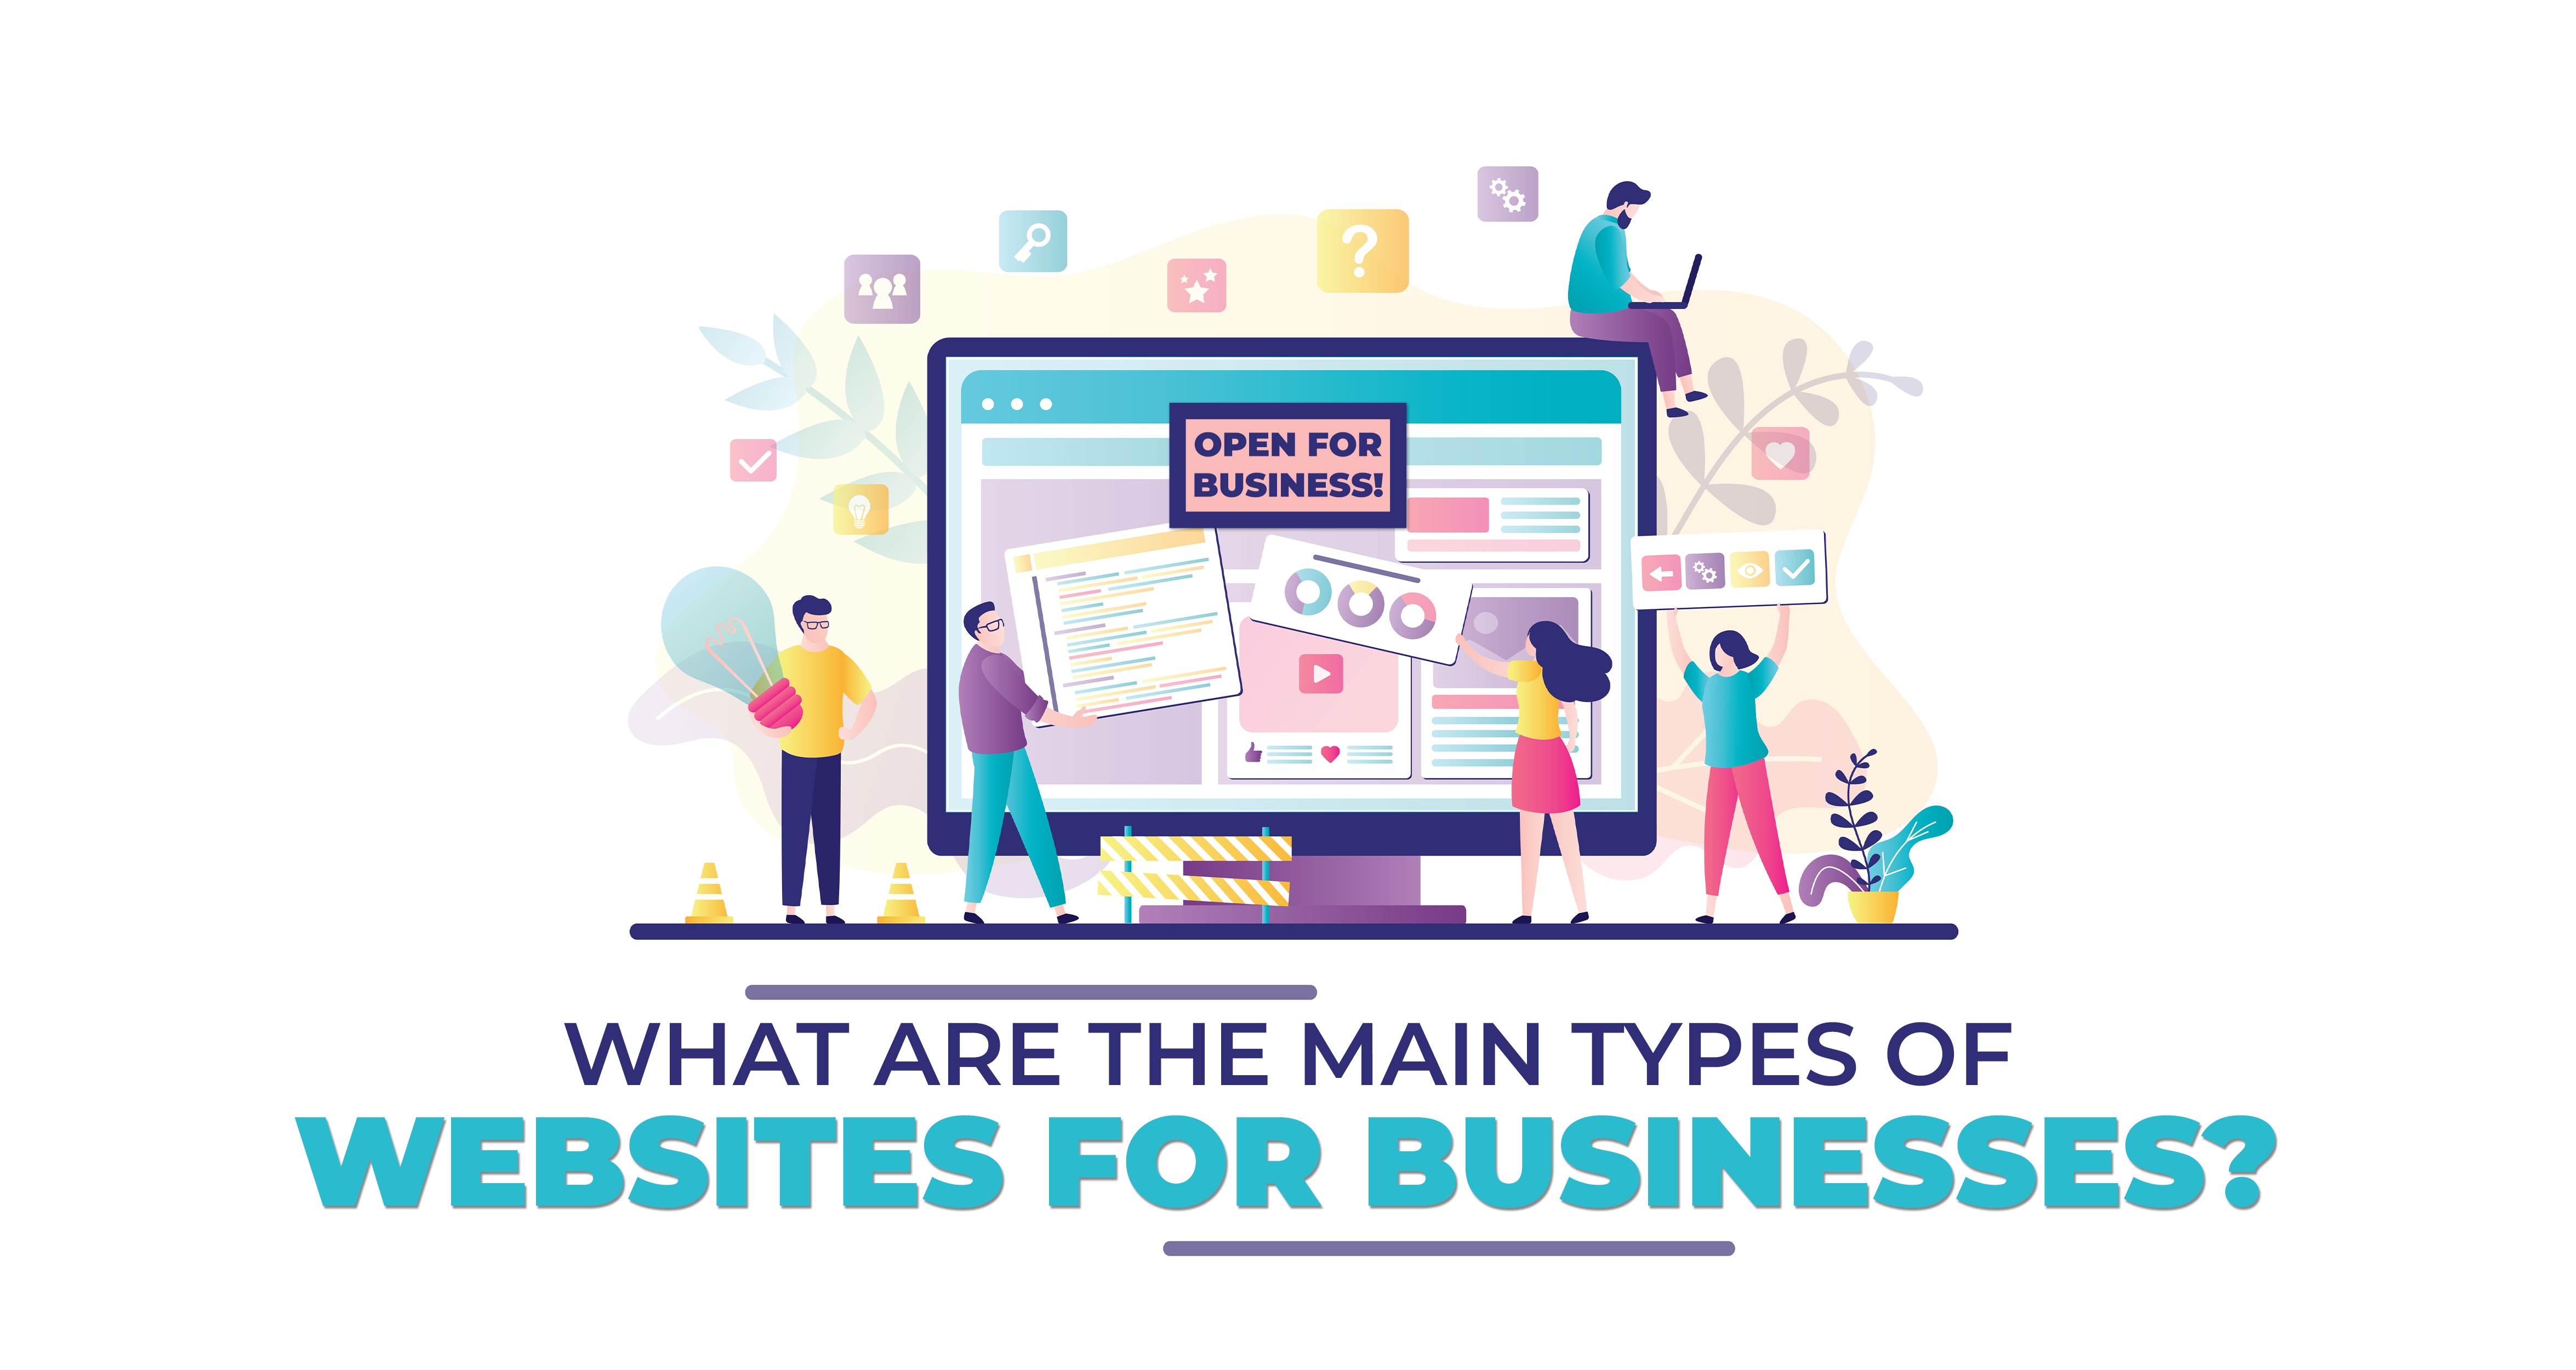 IT Solutions Blog Post - What are the Main Types of Websites for Businesses